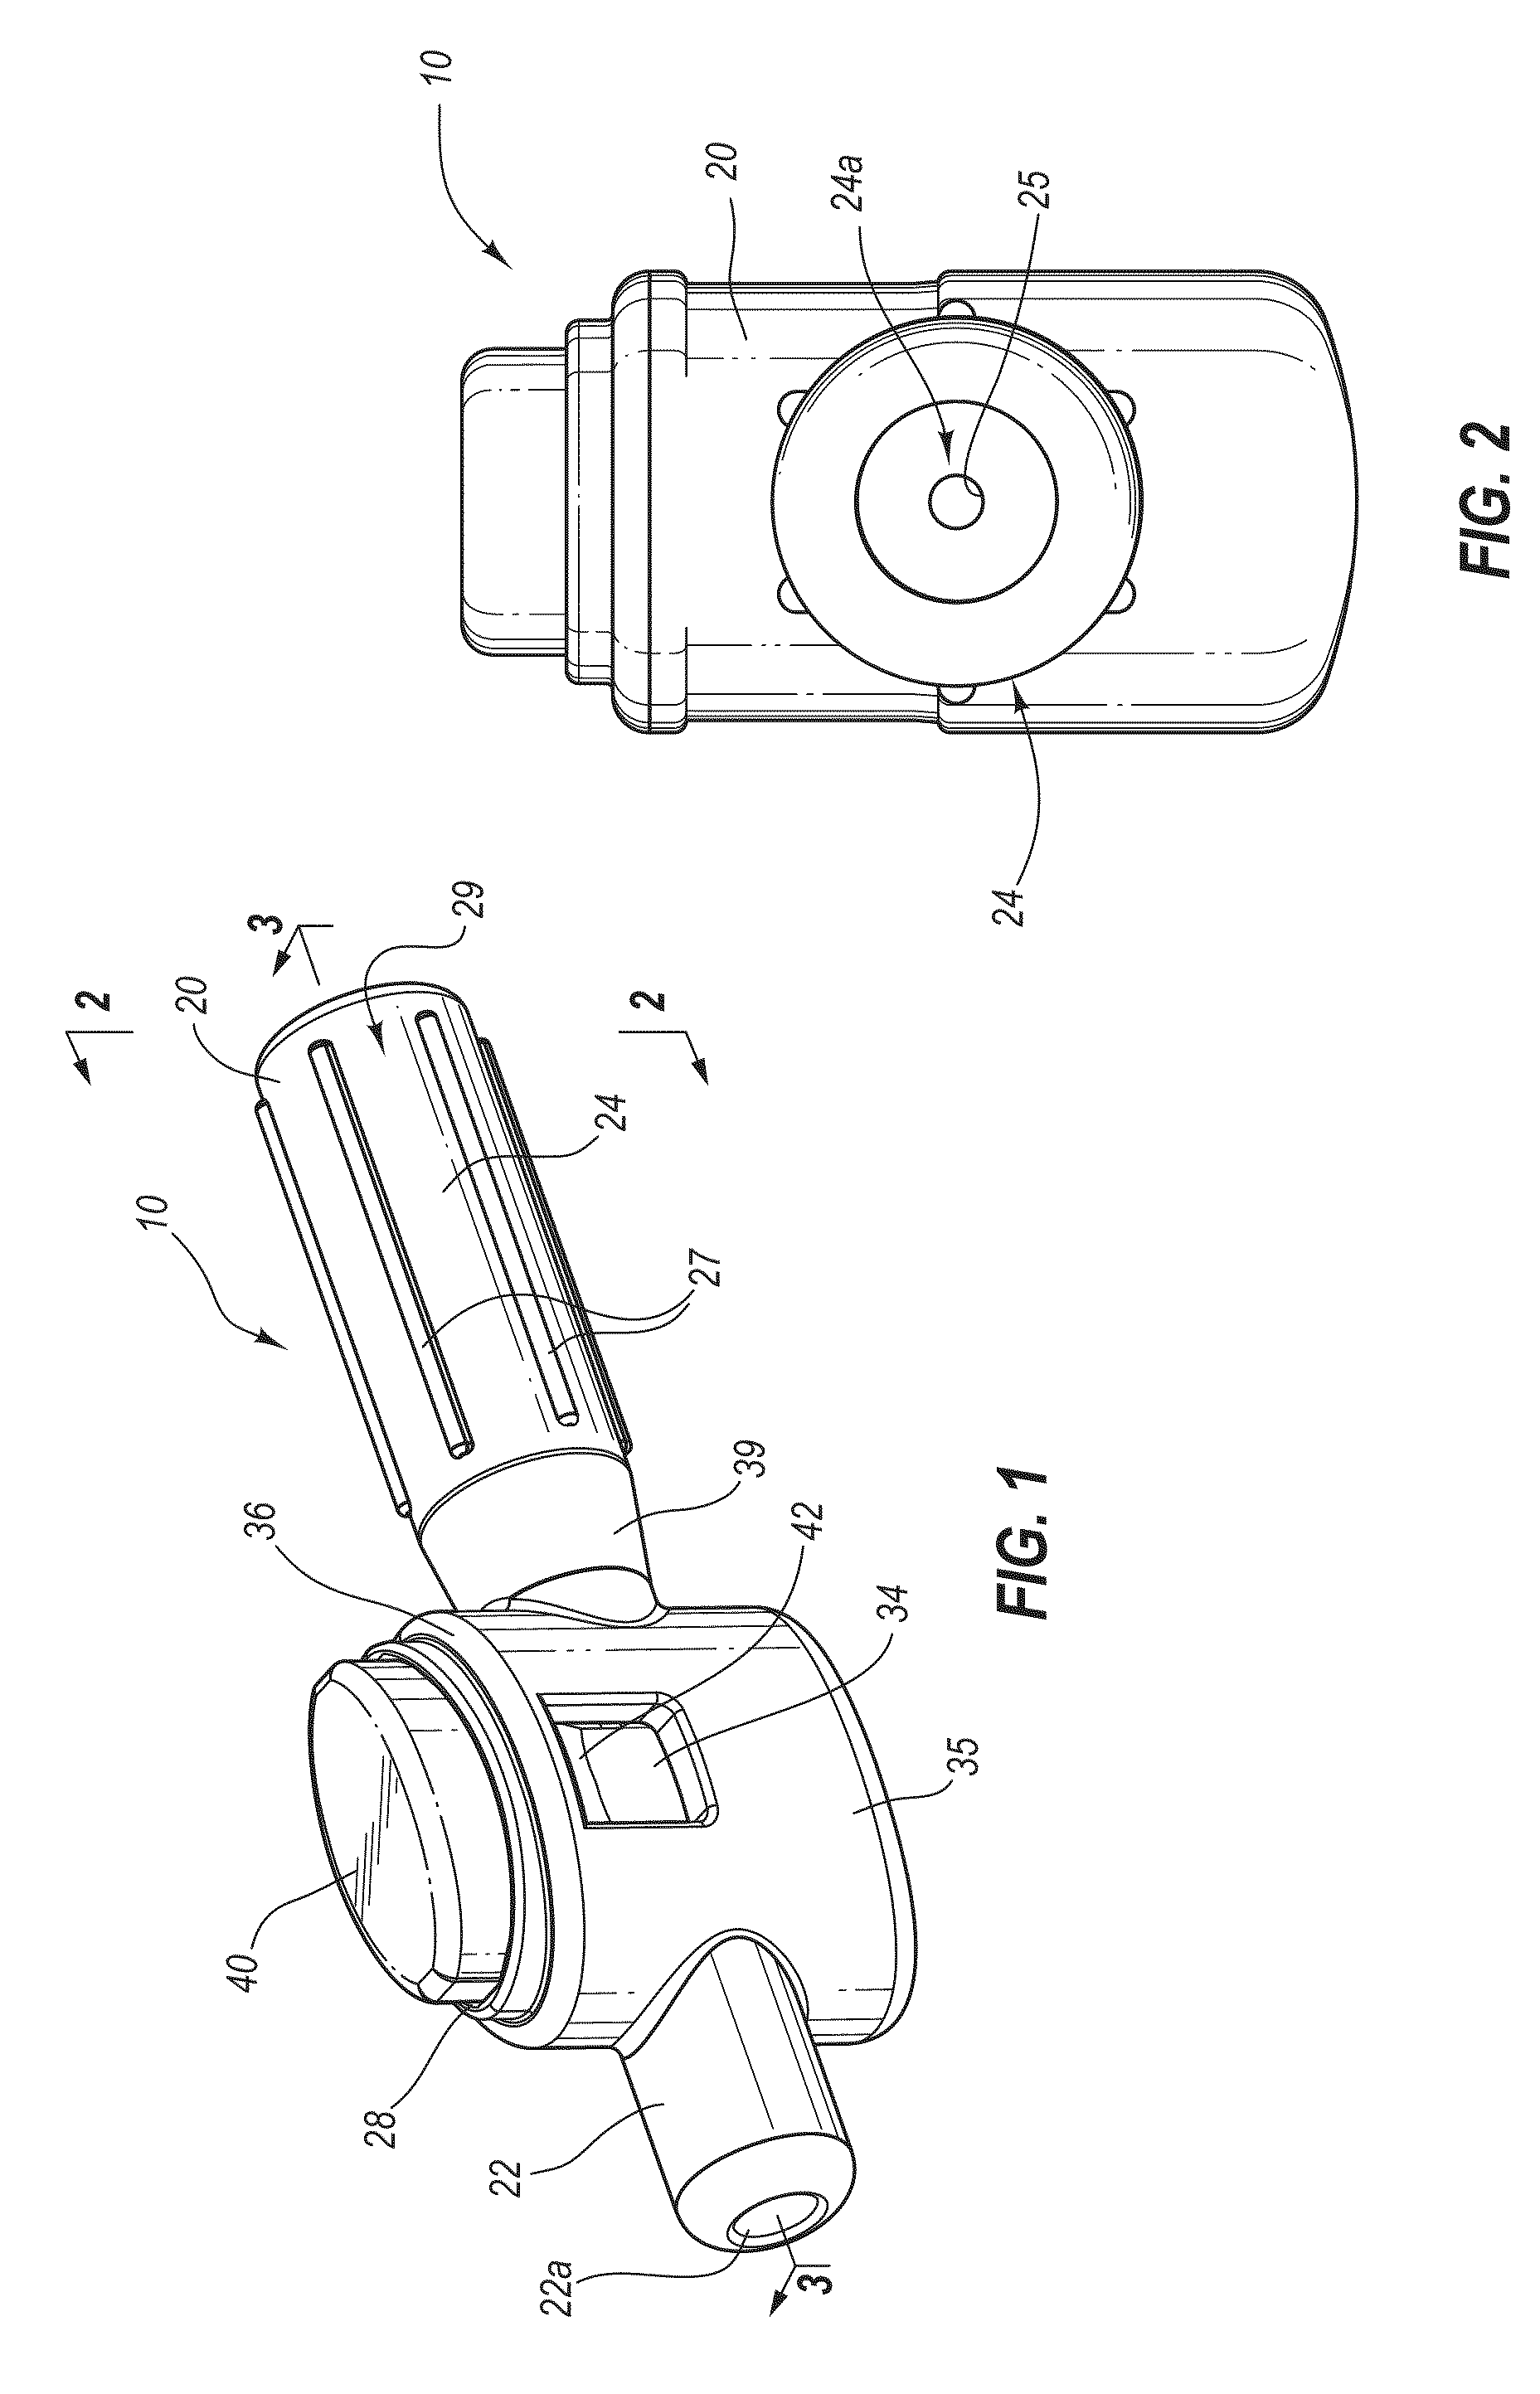 Torque device for a medical guidewire